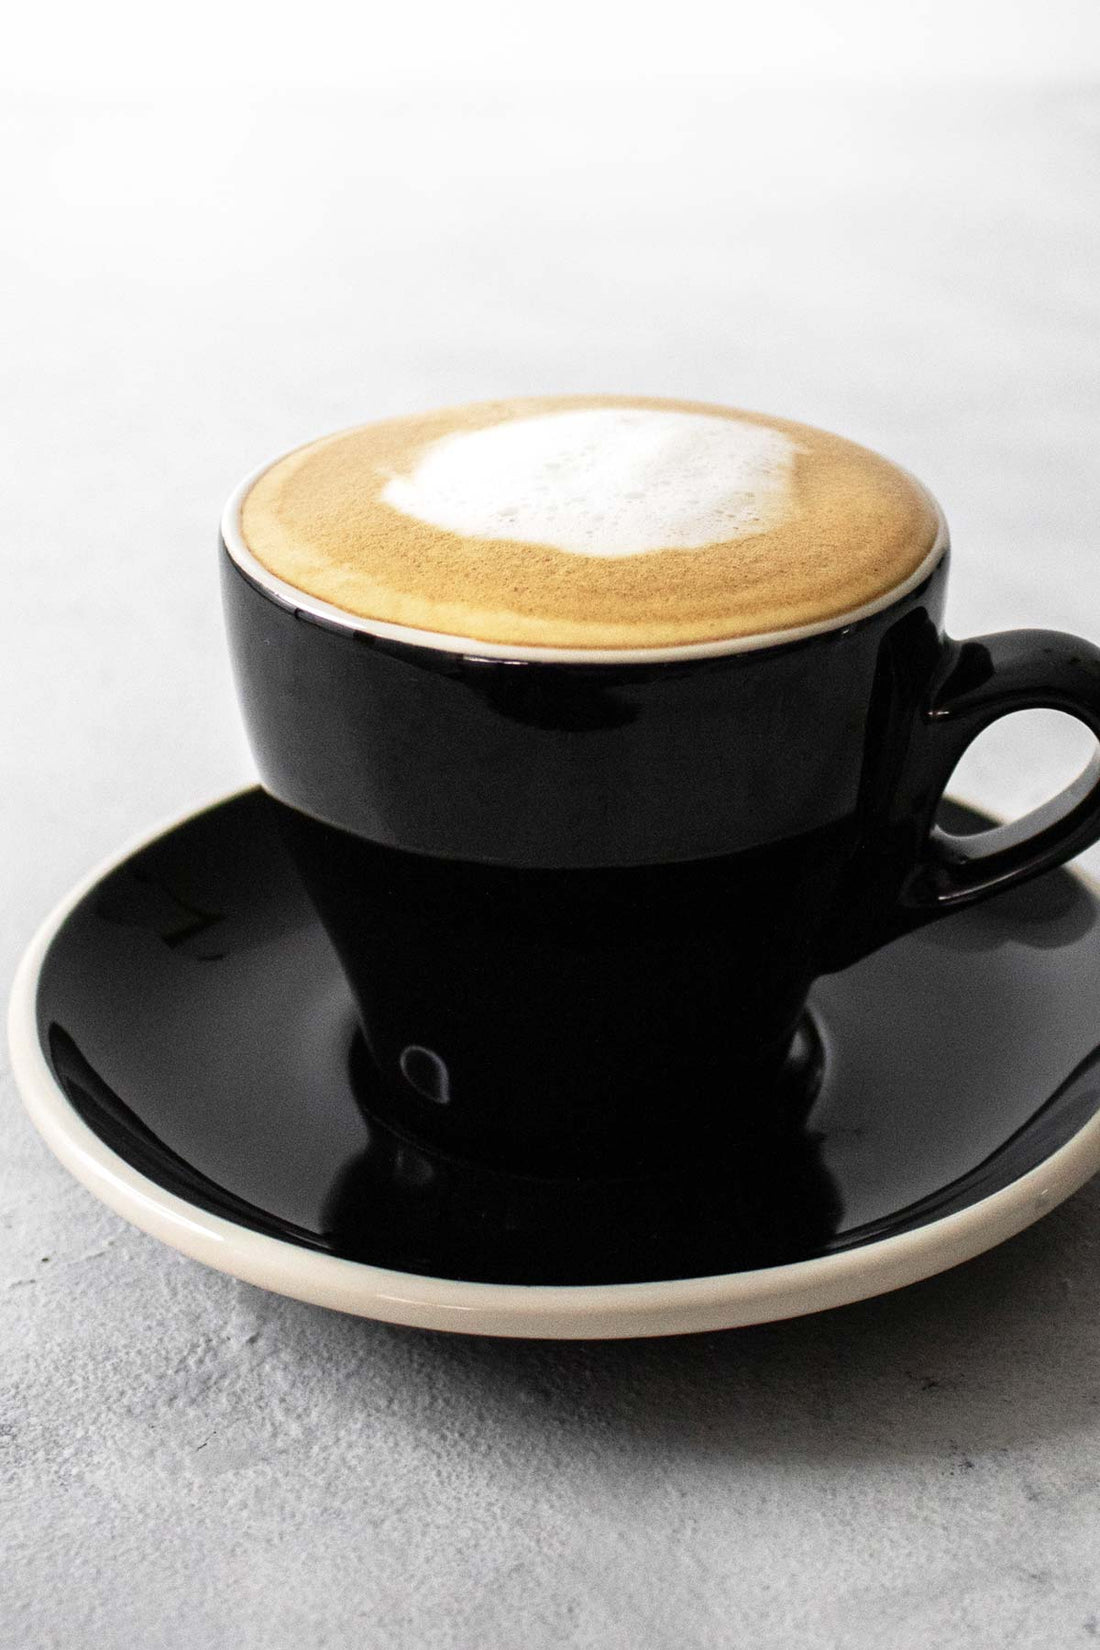 The Art of Making a Perfect CAPPUCCINO: A Guide to This Classic Espresso Drink